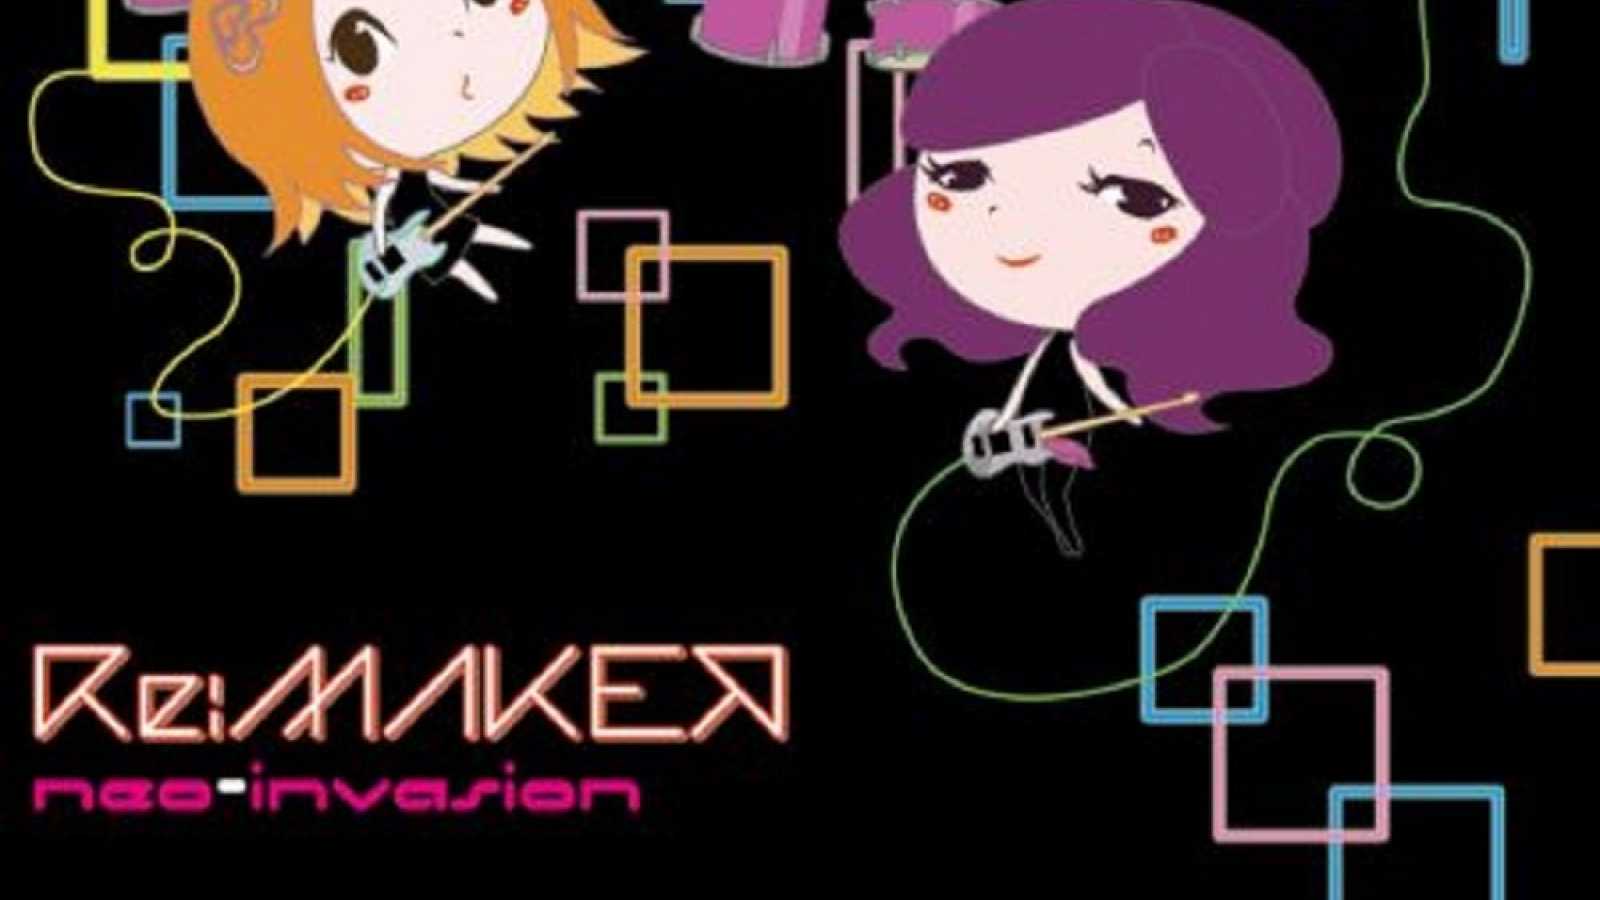 Re:MAKER - neo-invasion © Faith, Inc. All rights reserved.